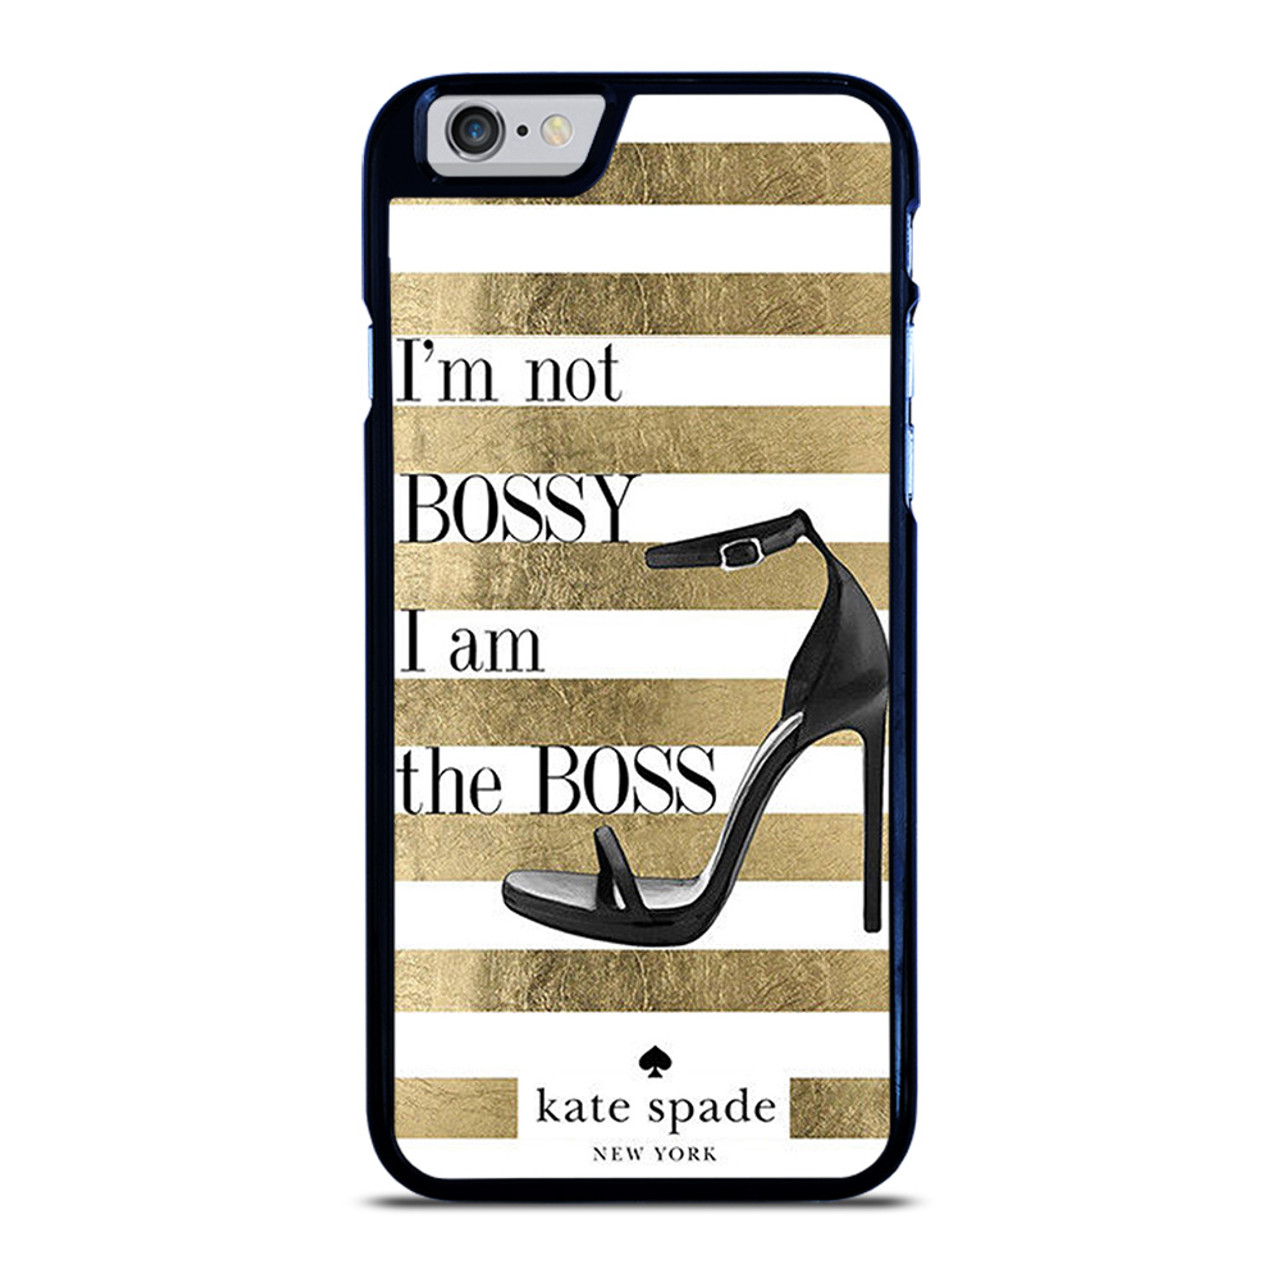 KATE SPADE THE BOSS iPhone 6 / 6S Case Cover